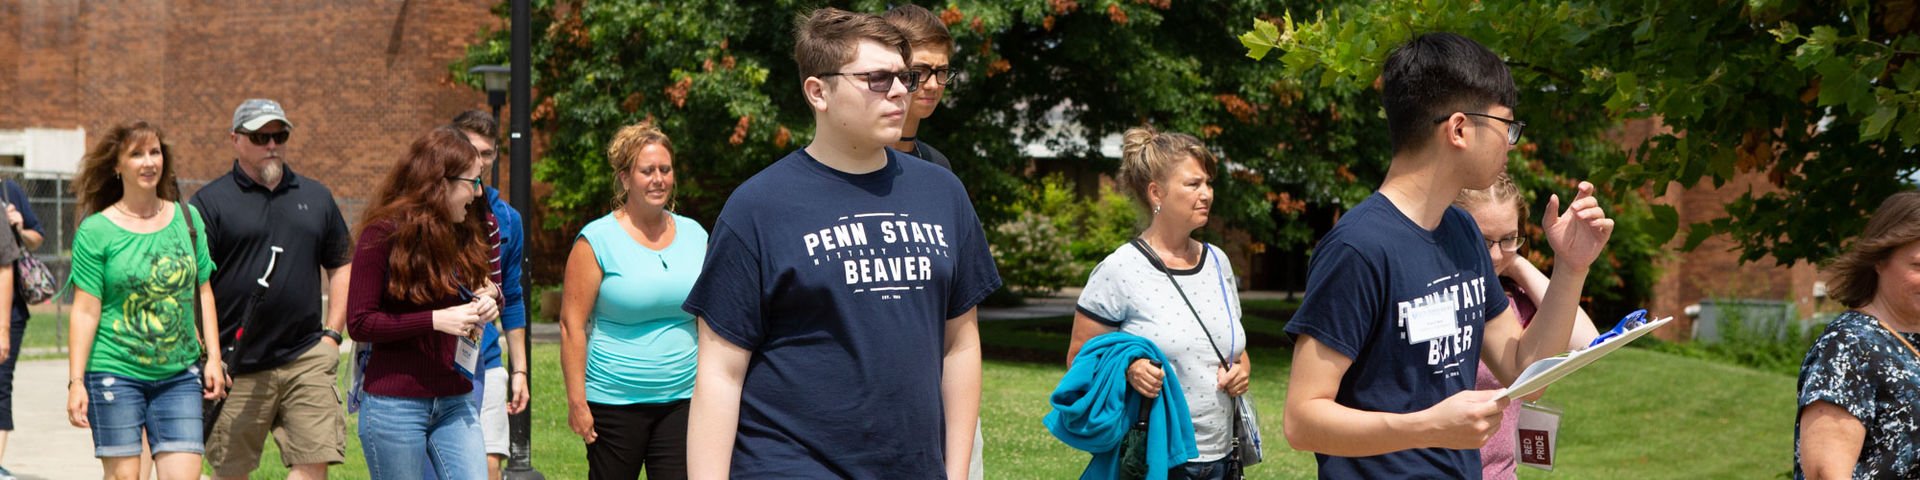 Prospective students and their parents tour campus.